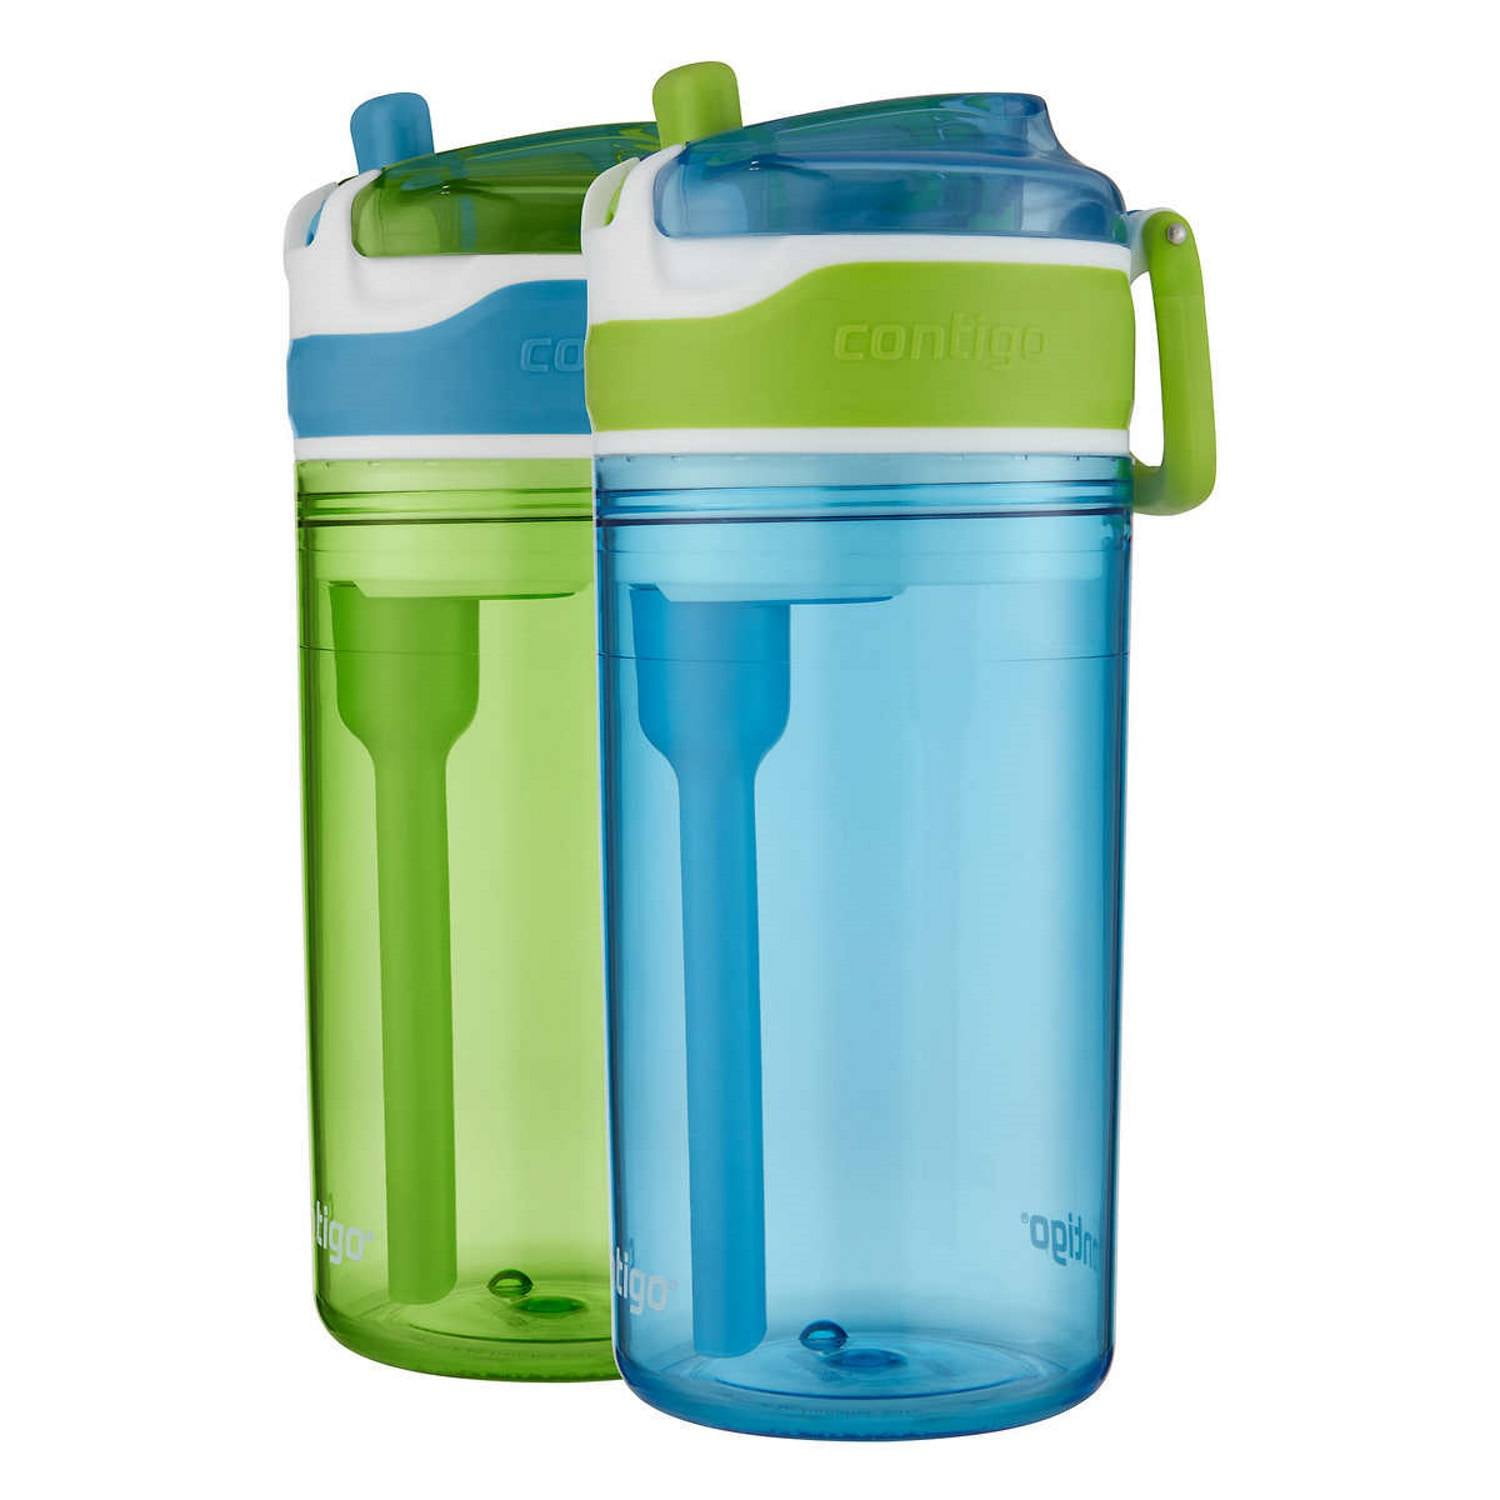 Contigo Snack Water Bottle, 2 Pack - 2 In 1 Water Bottle With